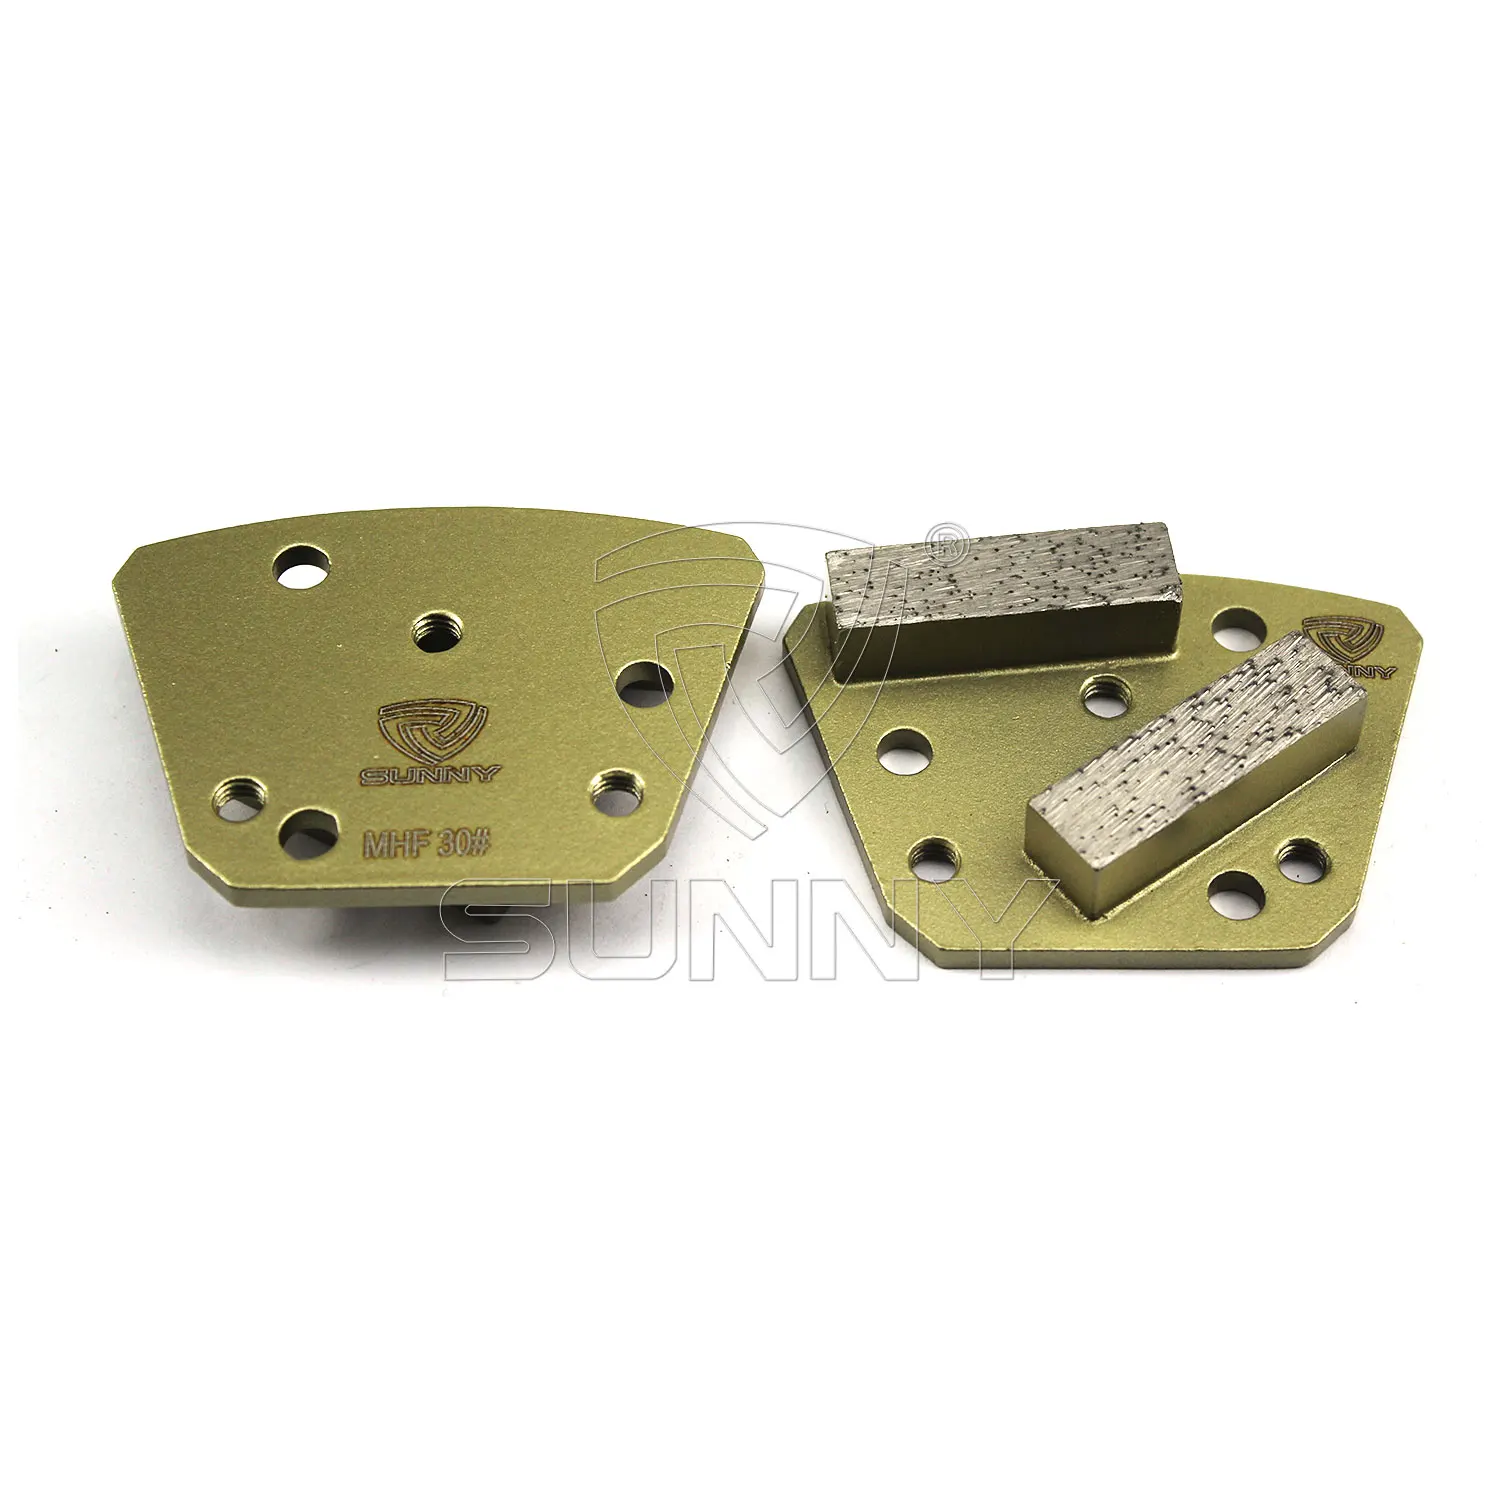 
16 Grit Trapezoid diamond magnetic grinding plate for epoxy concrete floor 